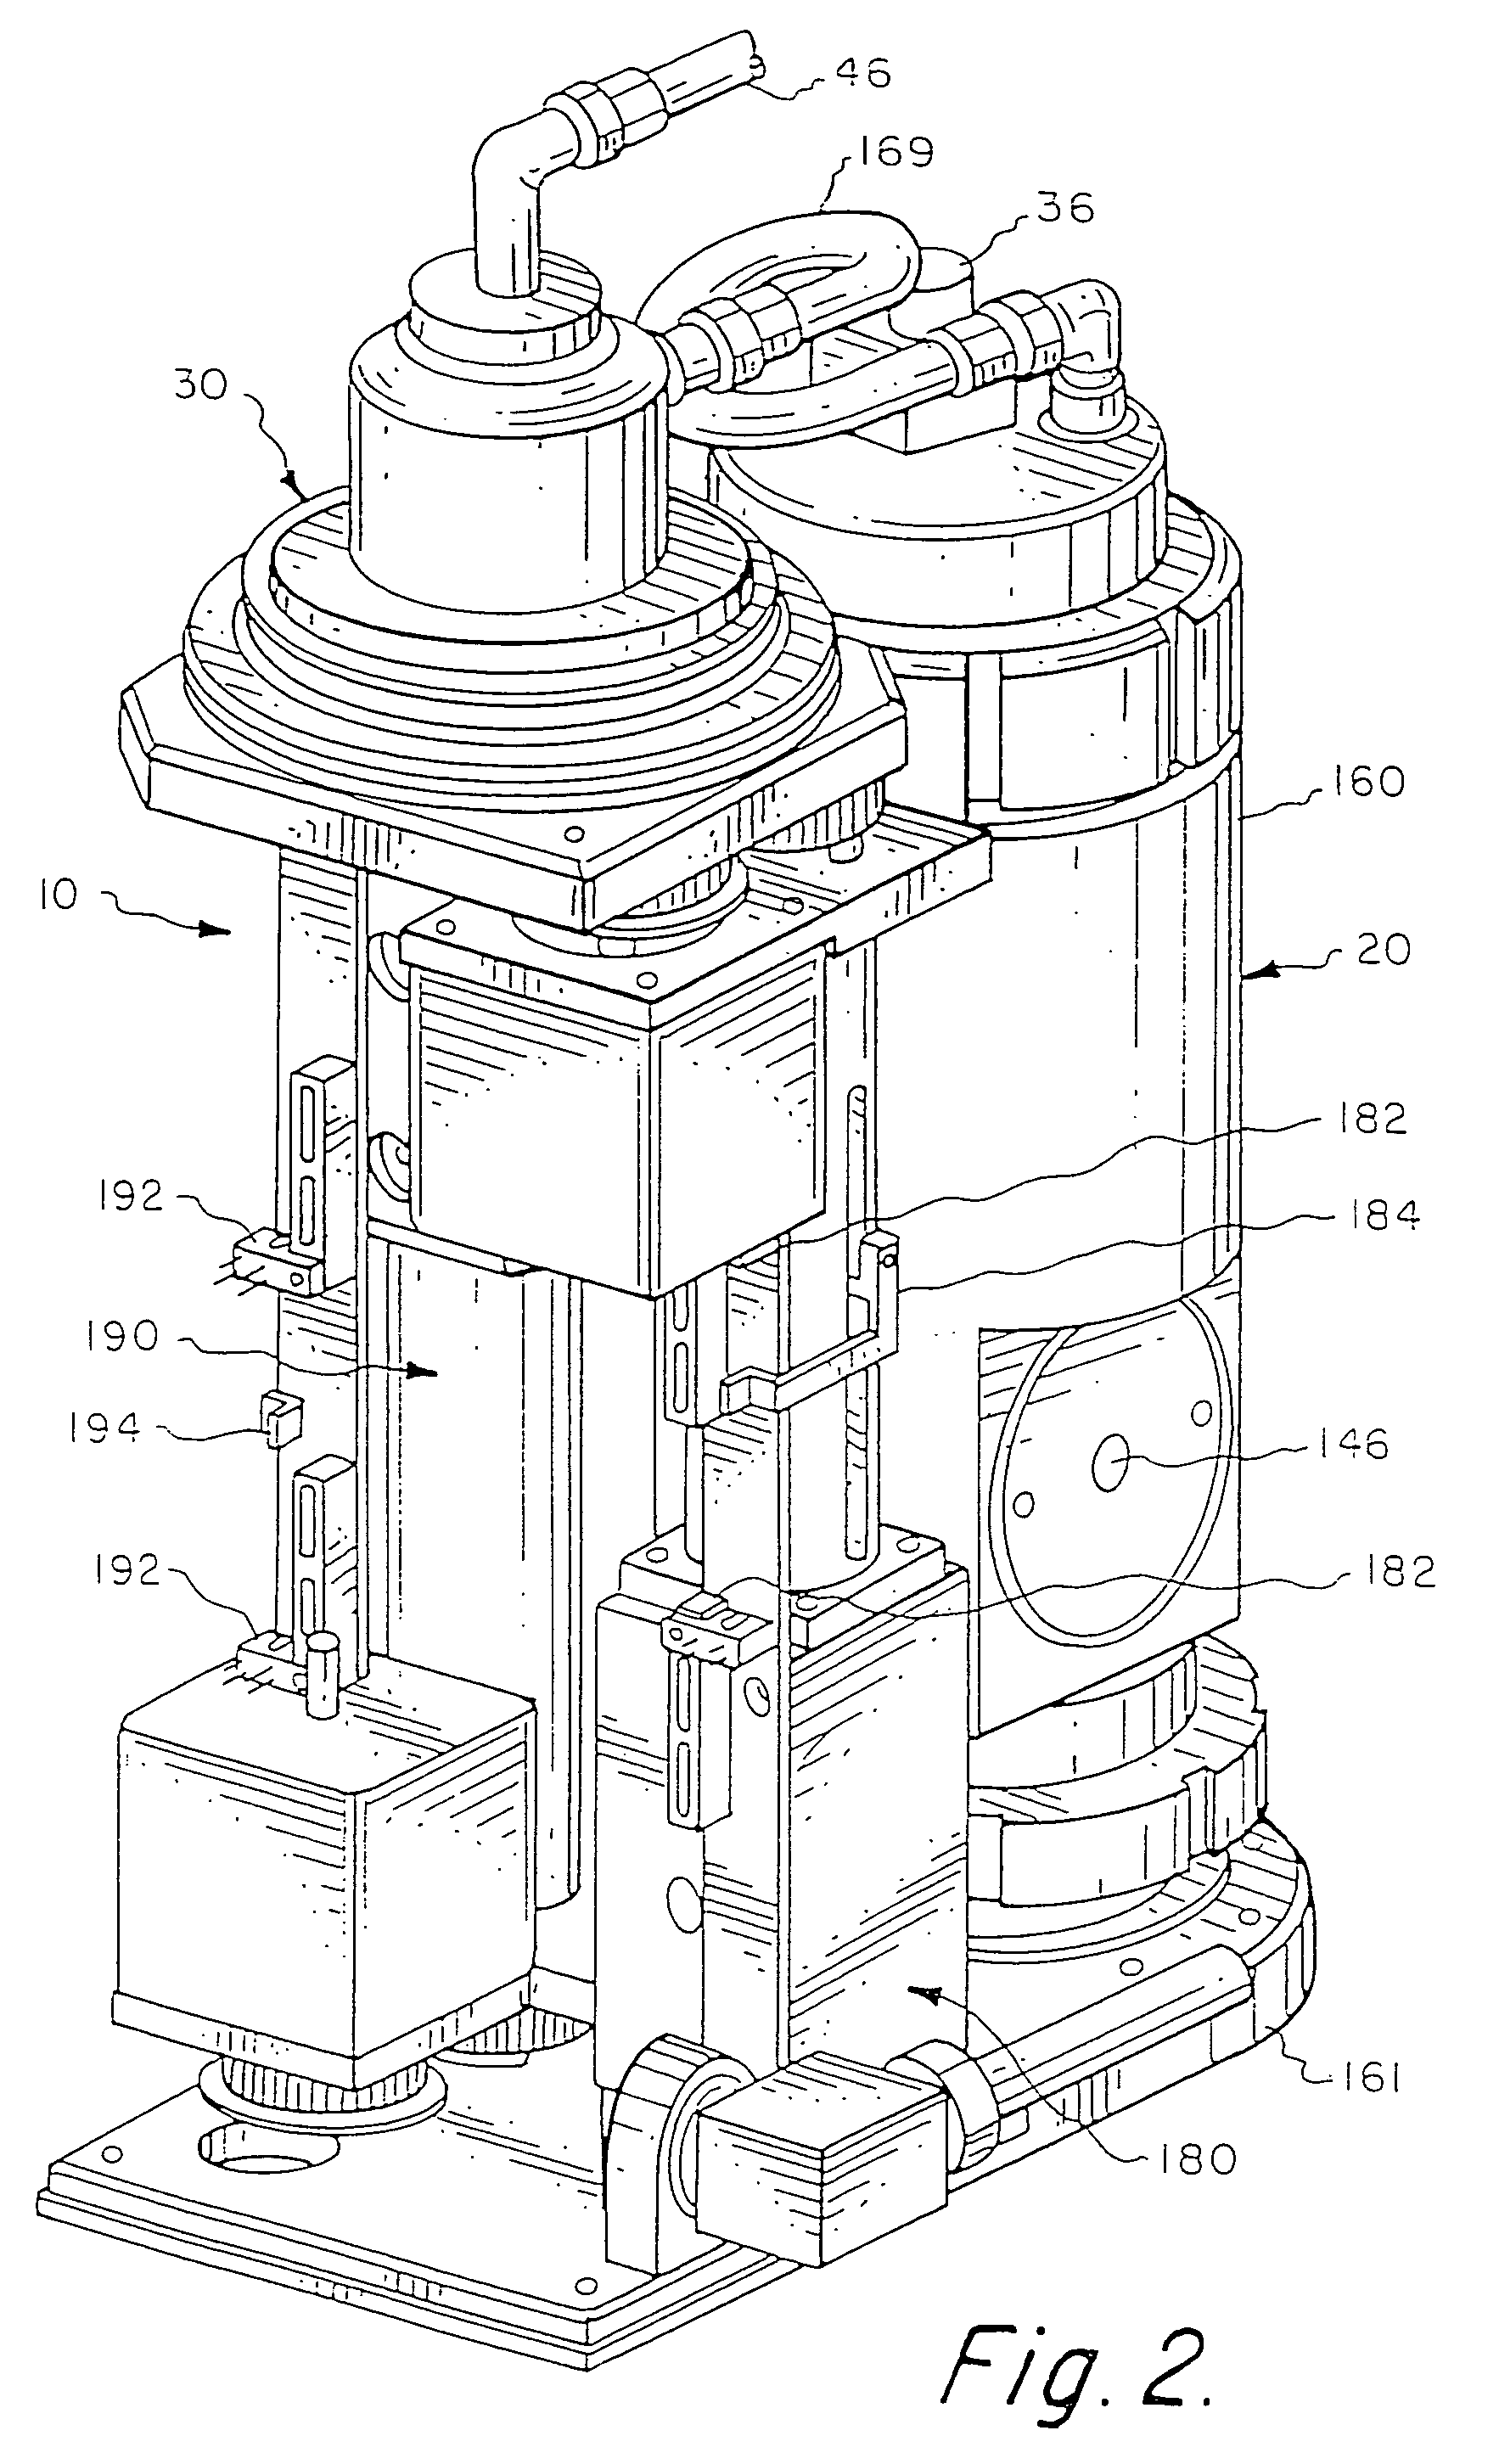 Apparatus and methods for pumping high viscosity fluids